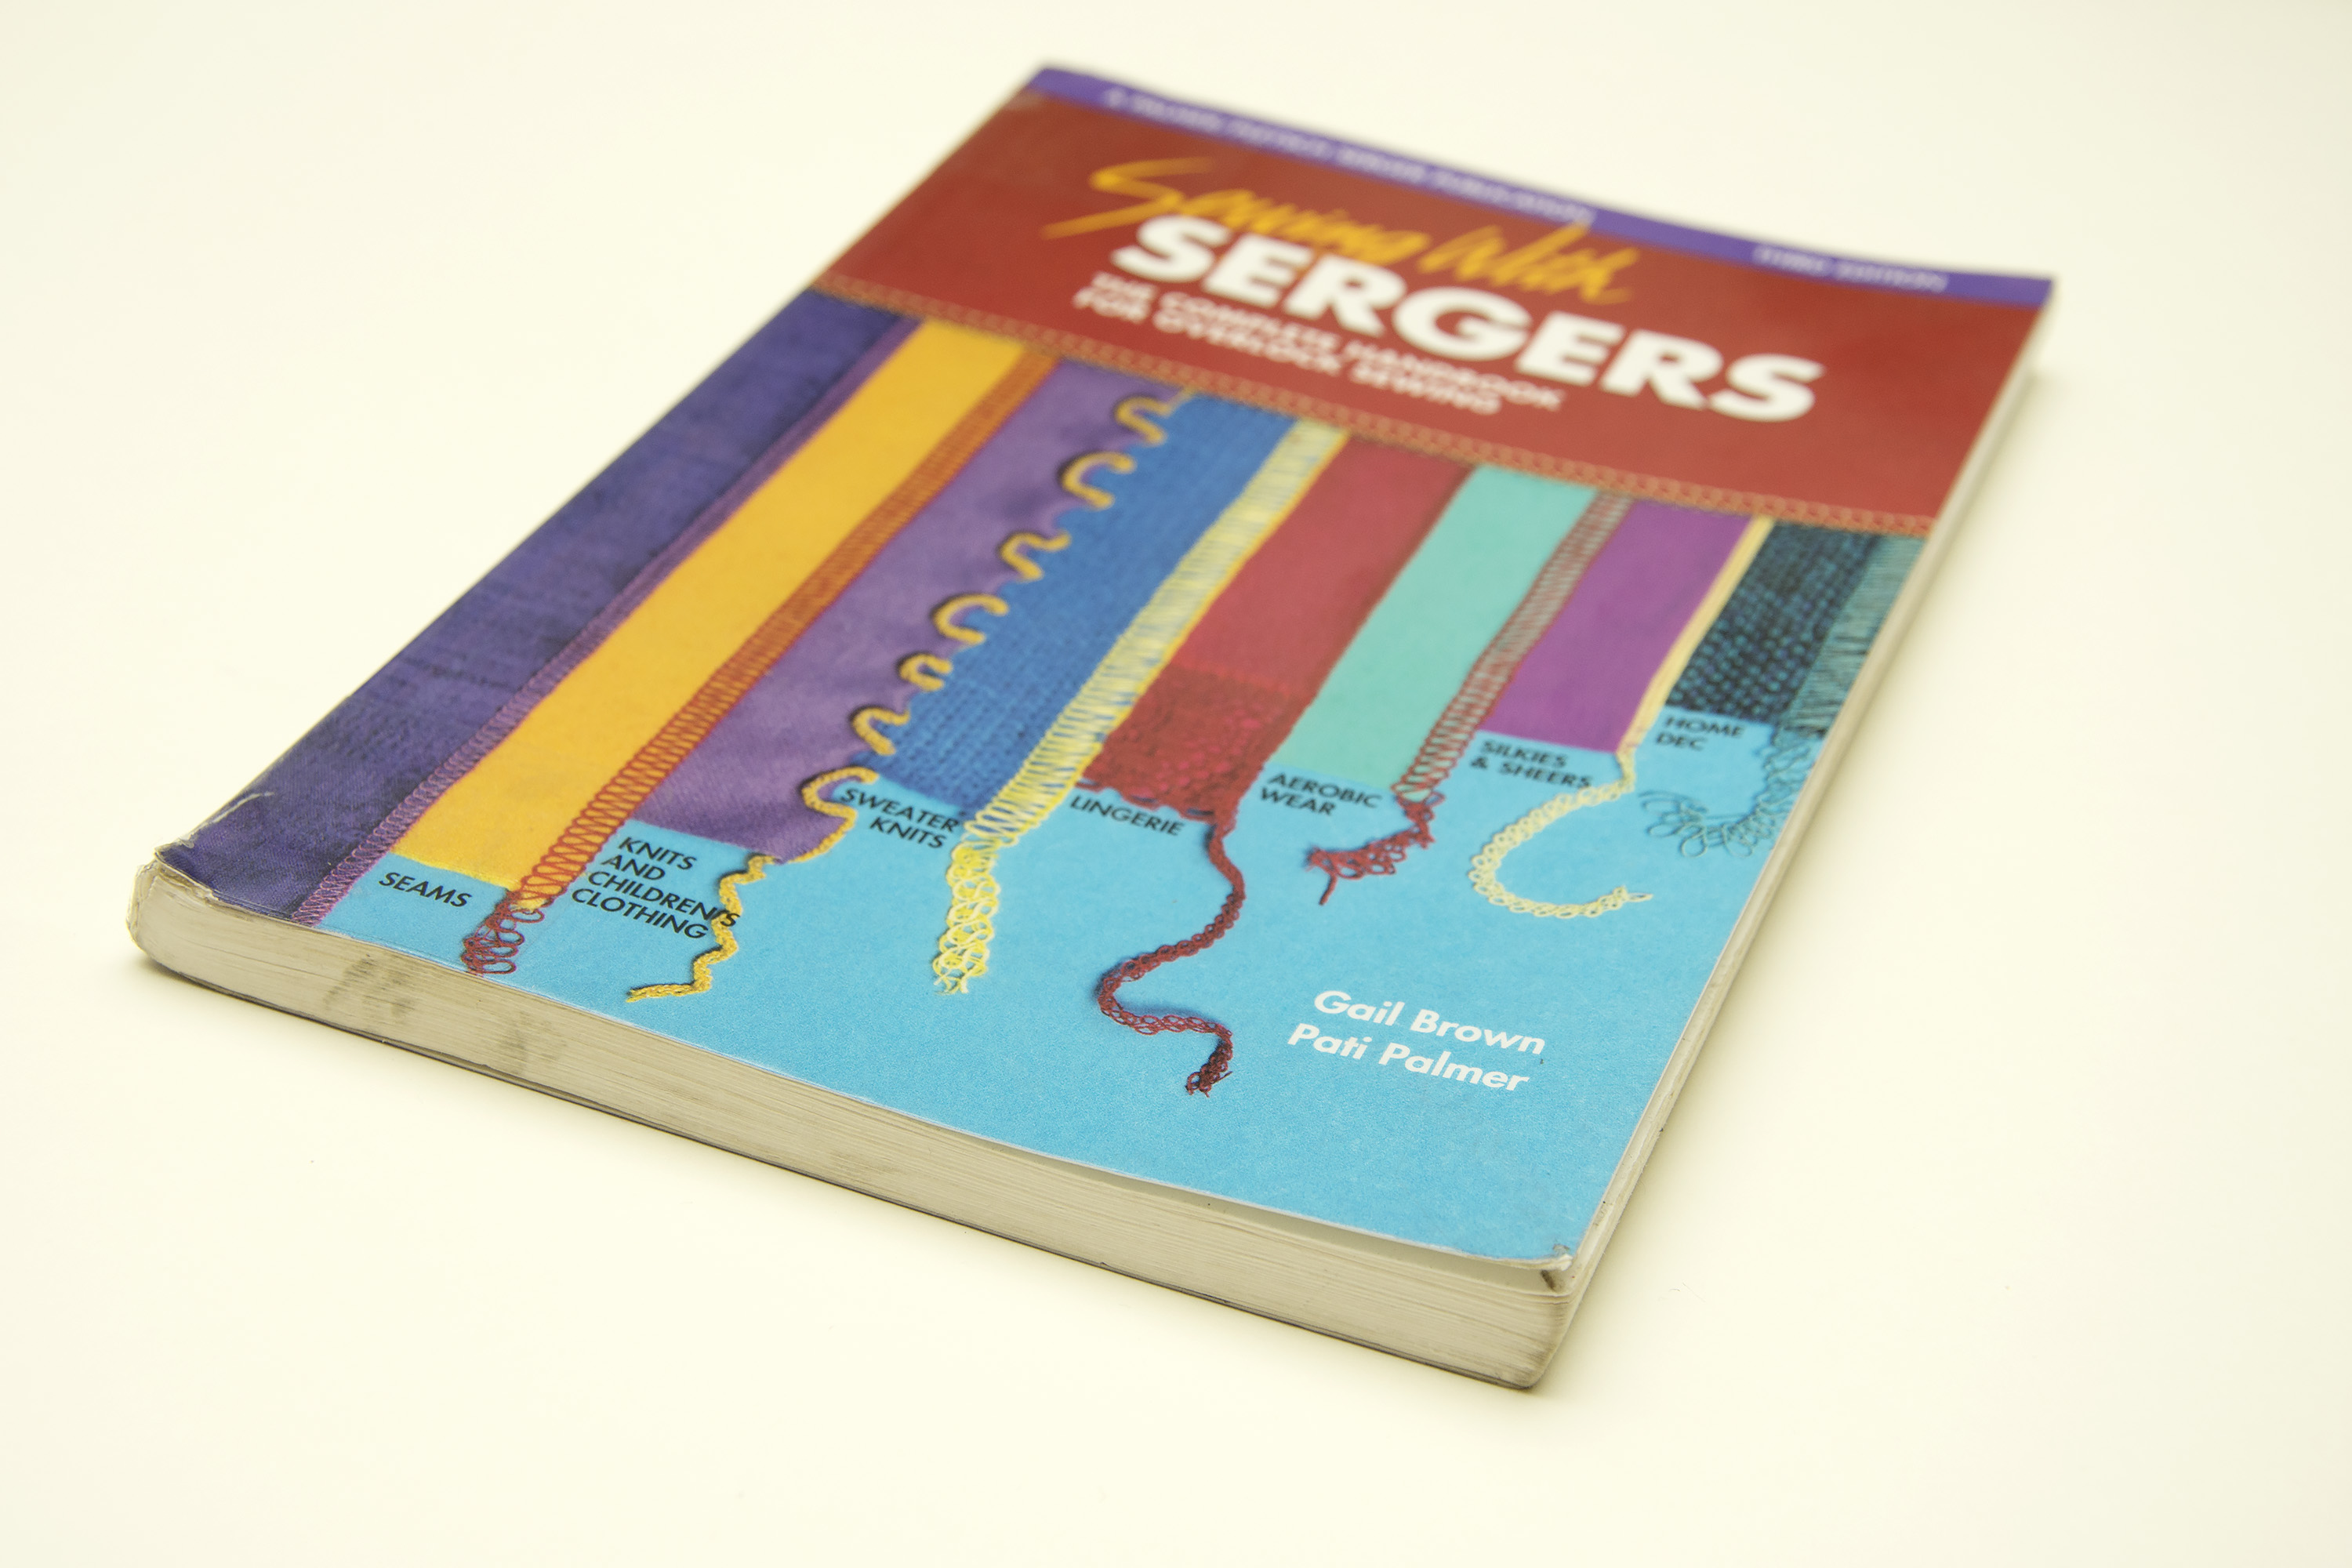 Sewing with sergers